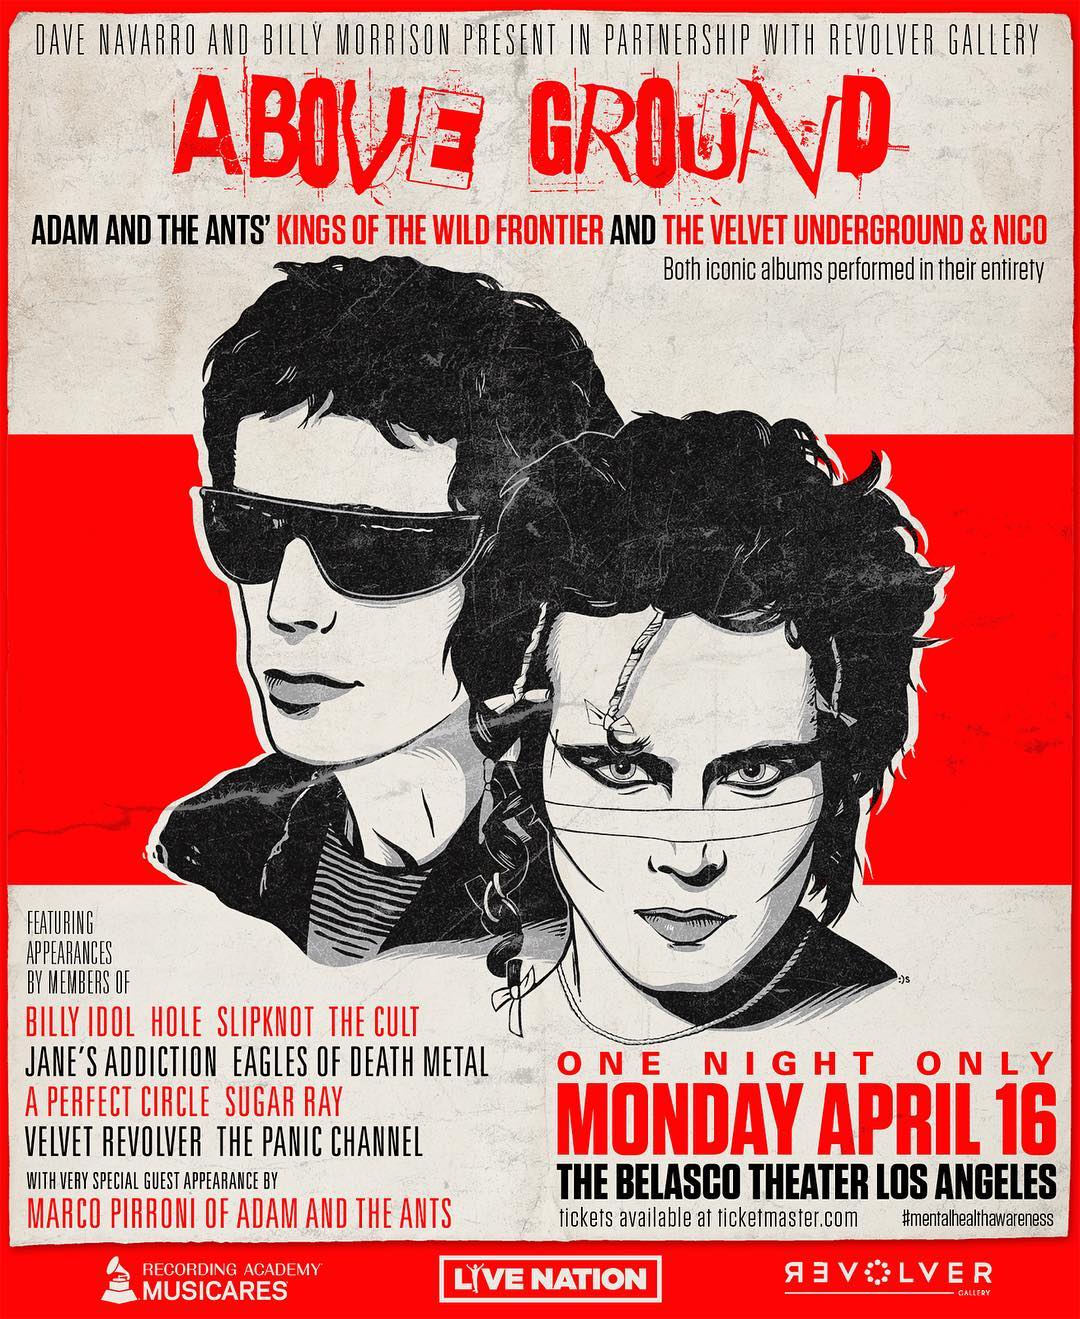 Poster for Above Ground music festival presented by Revolver Gallery with Billy Idol, Courtney Love, and more.